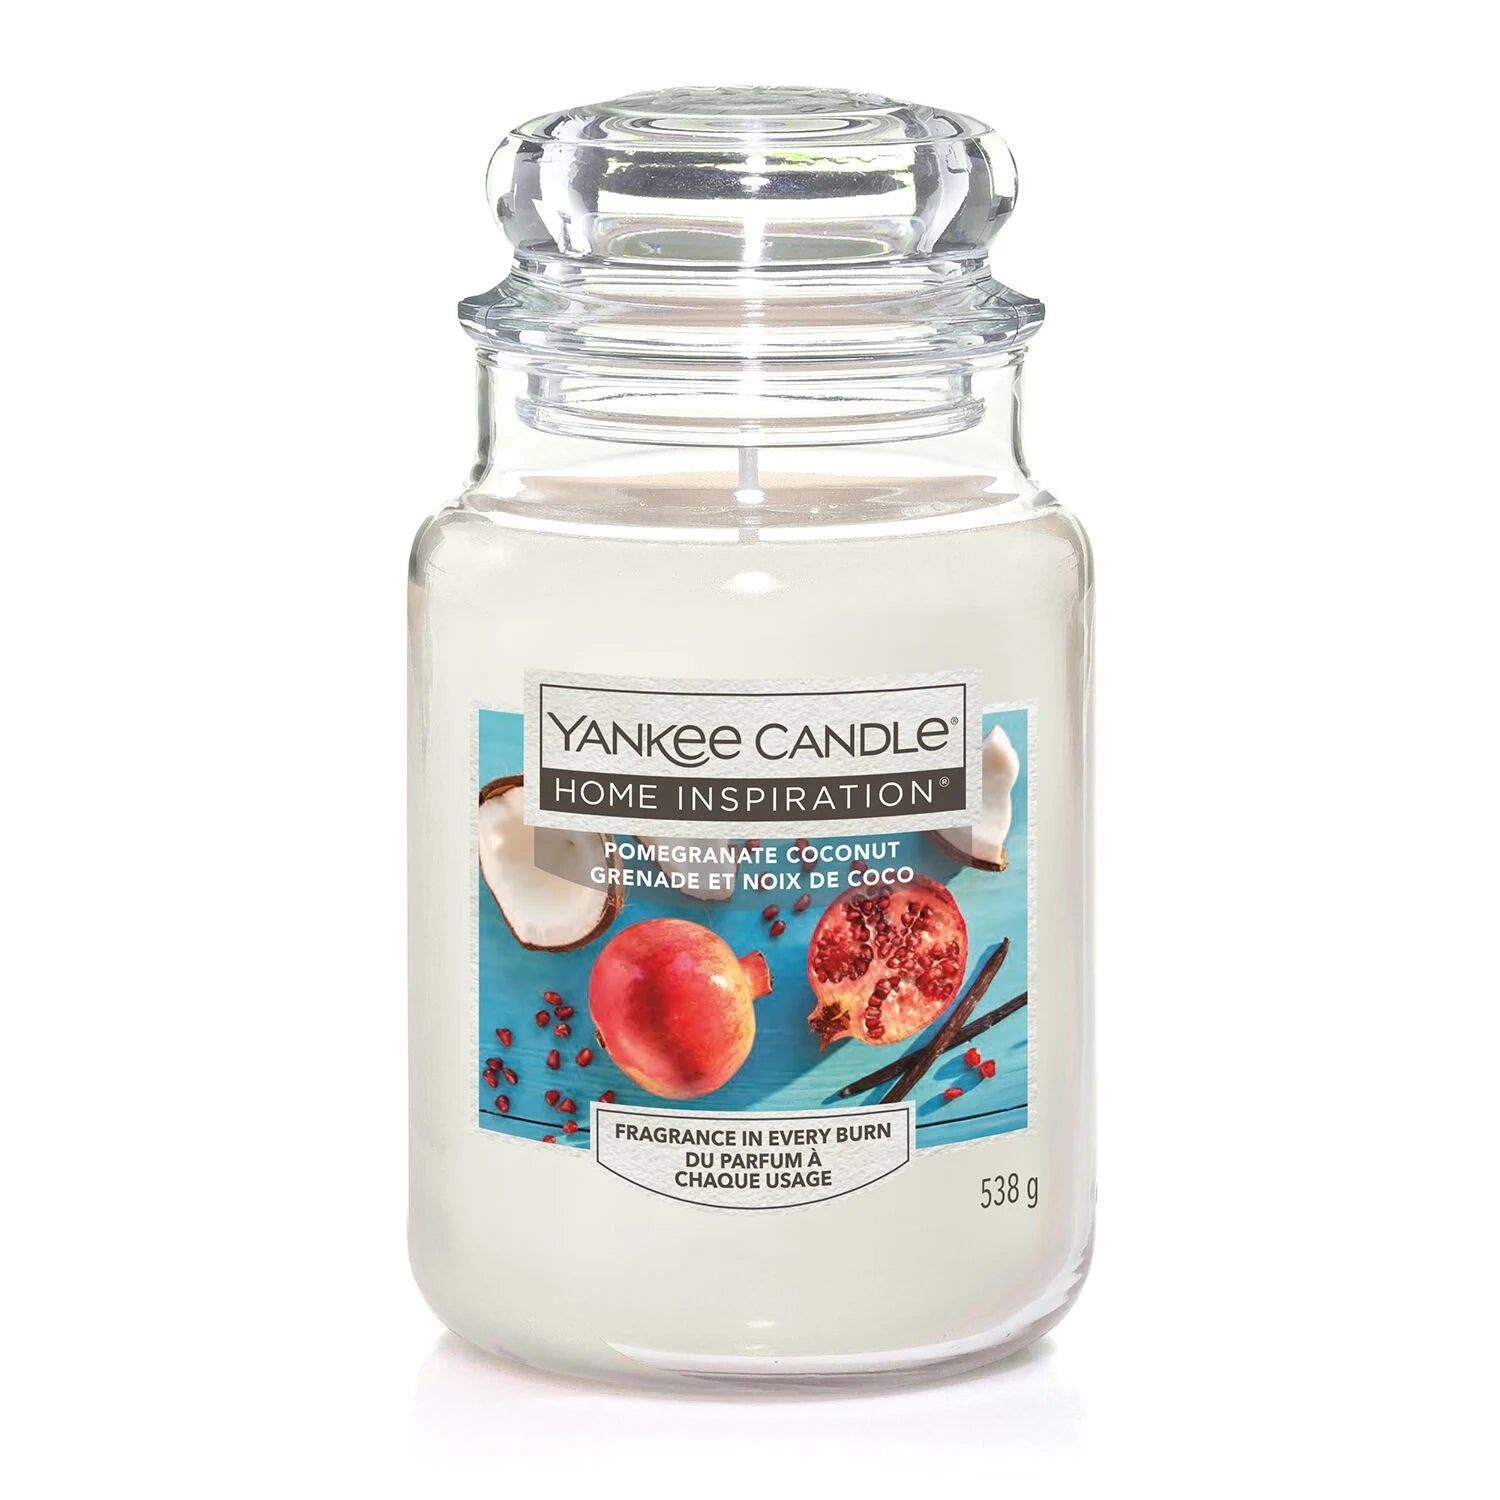 Pomegranate Coconut 538g | Home Inspirations Candle